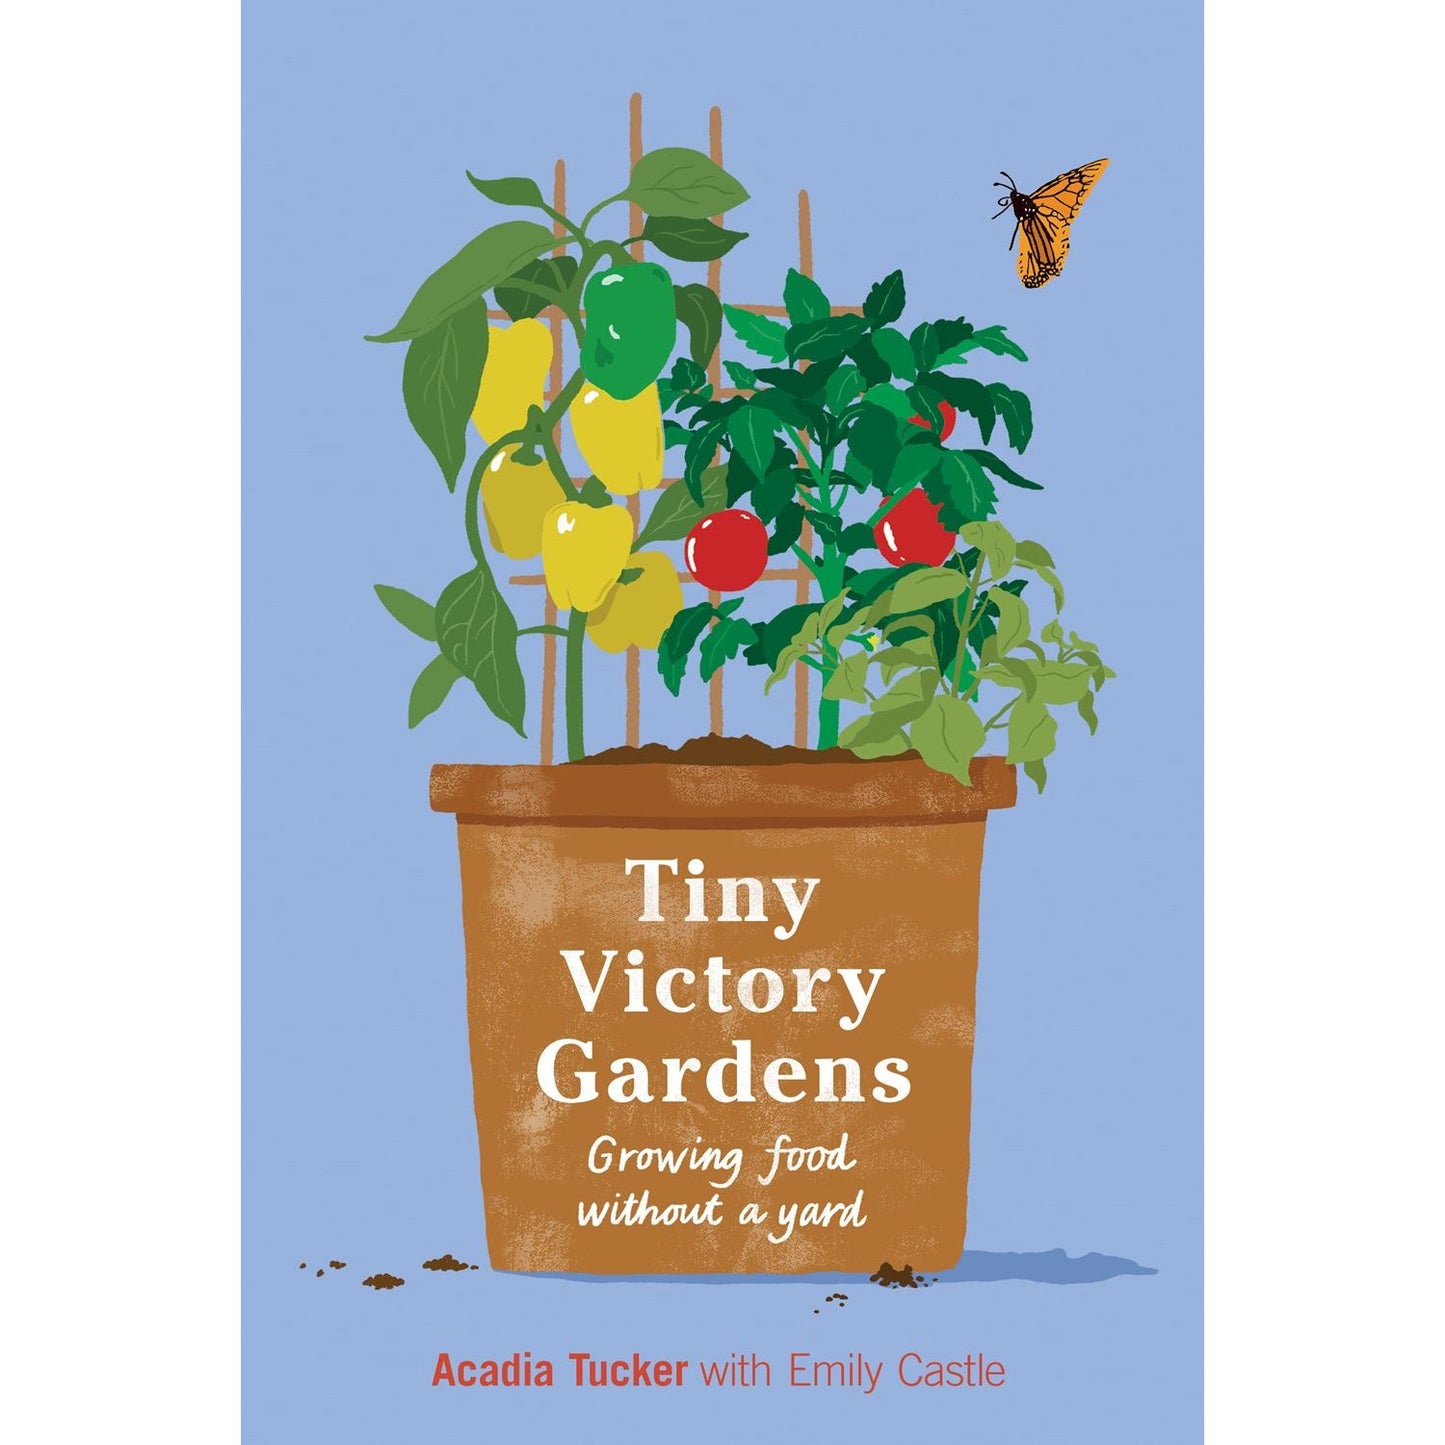 Tiny Victory Gardens: Growing Food Without a Yard (Acadia Tucker with Emily Castle)